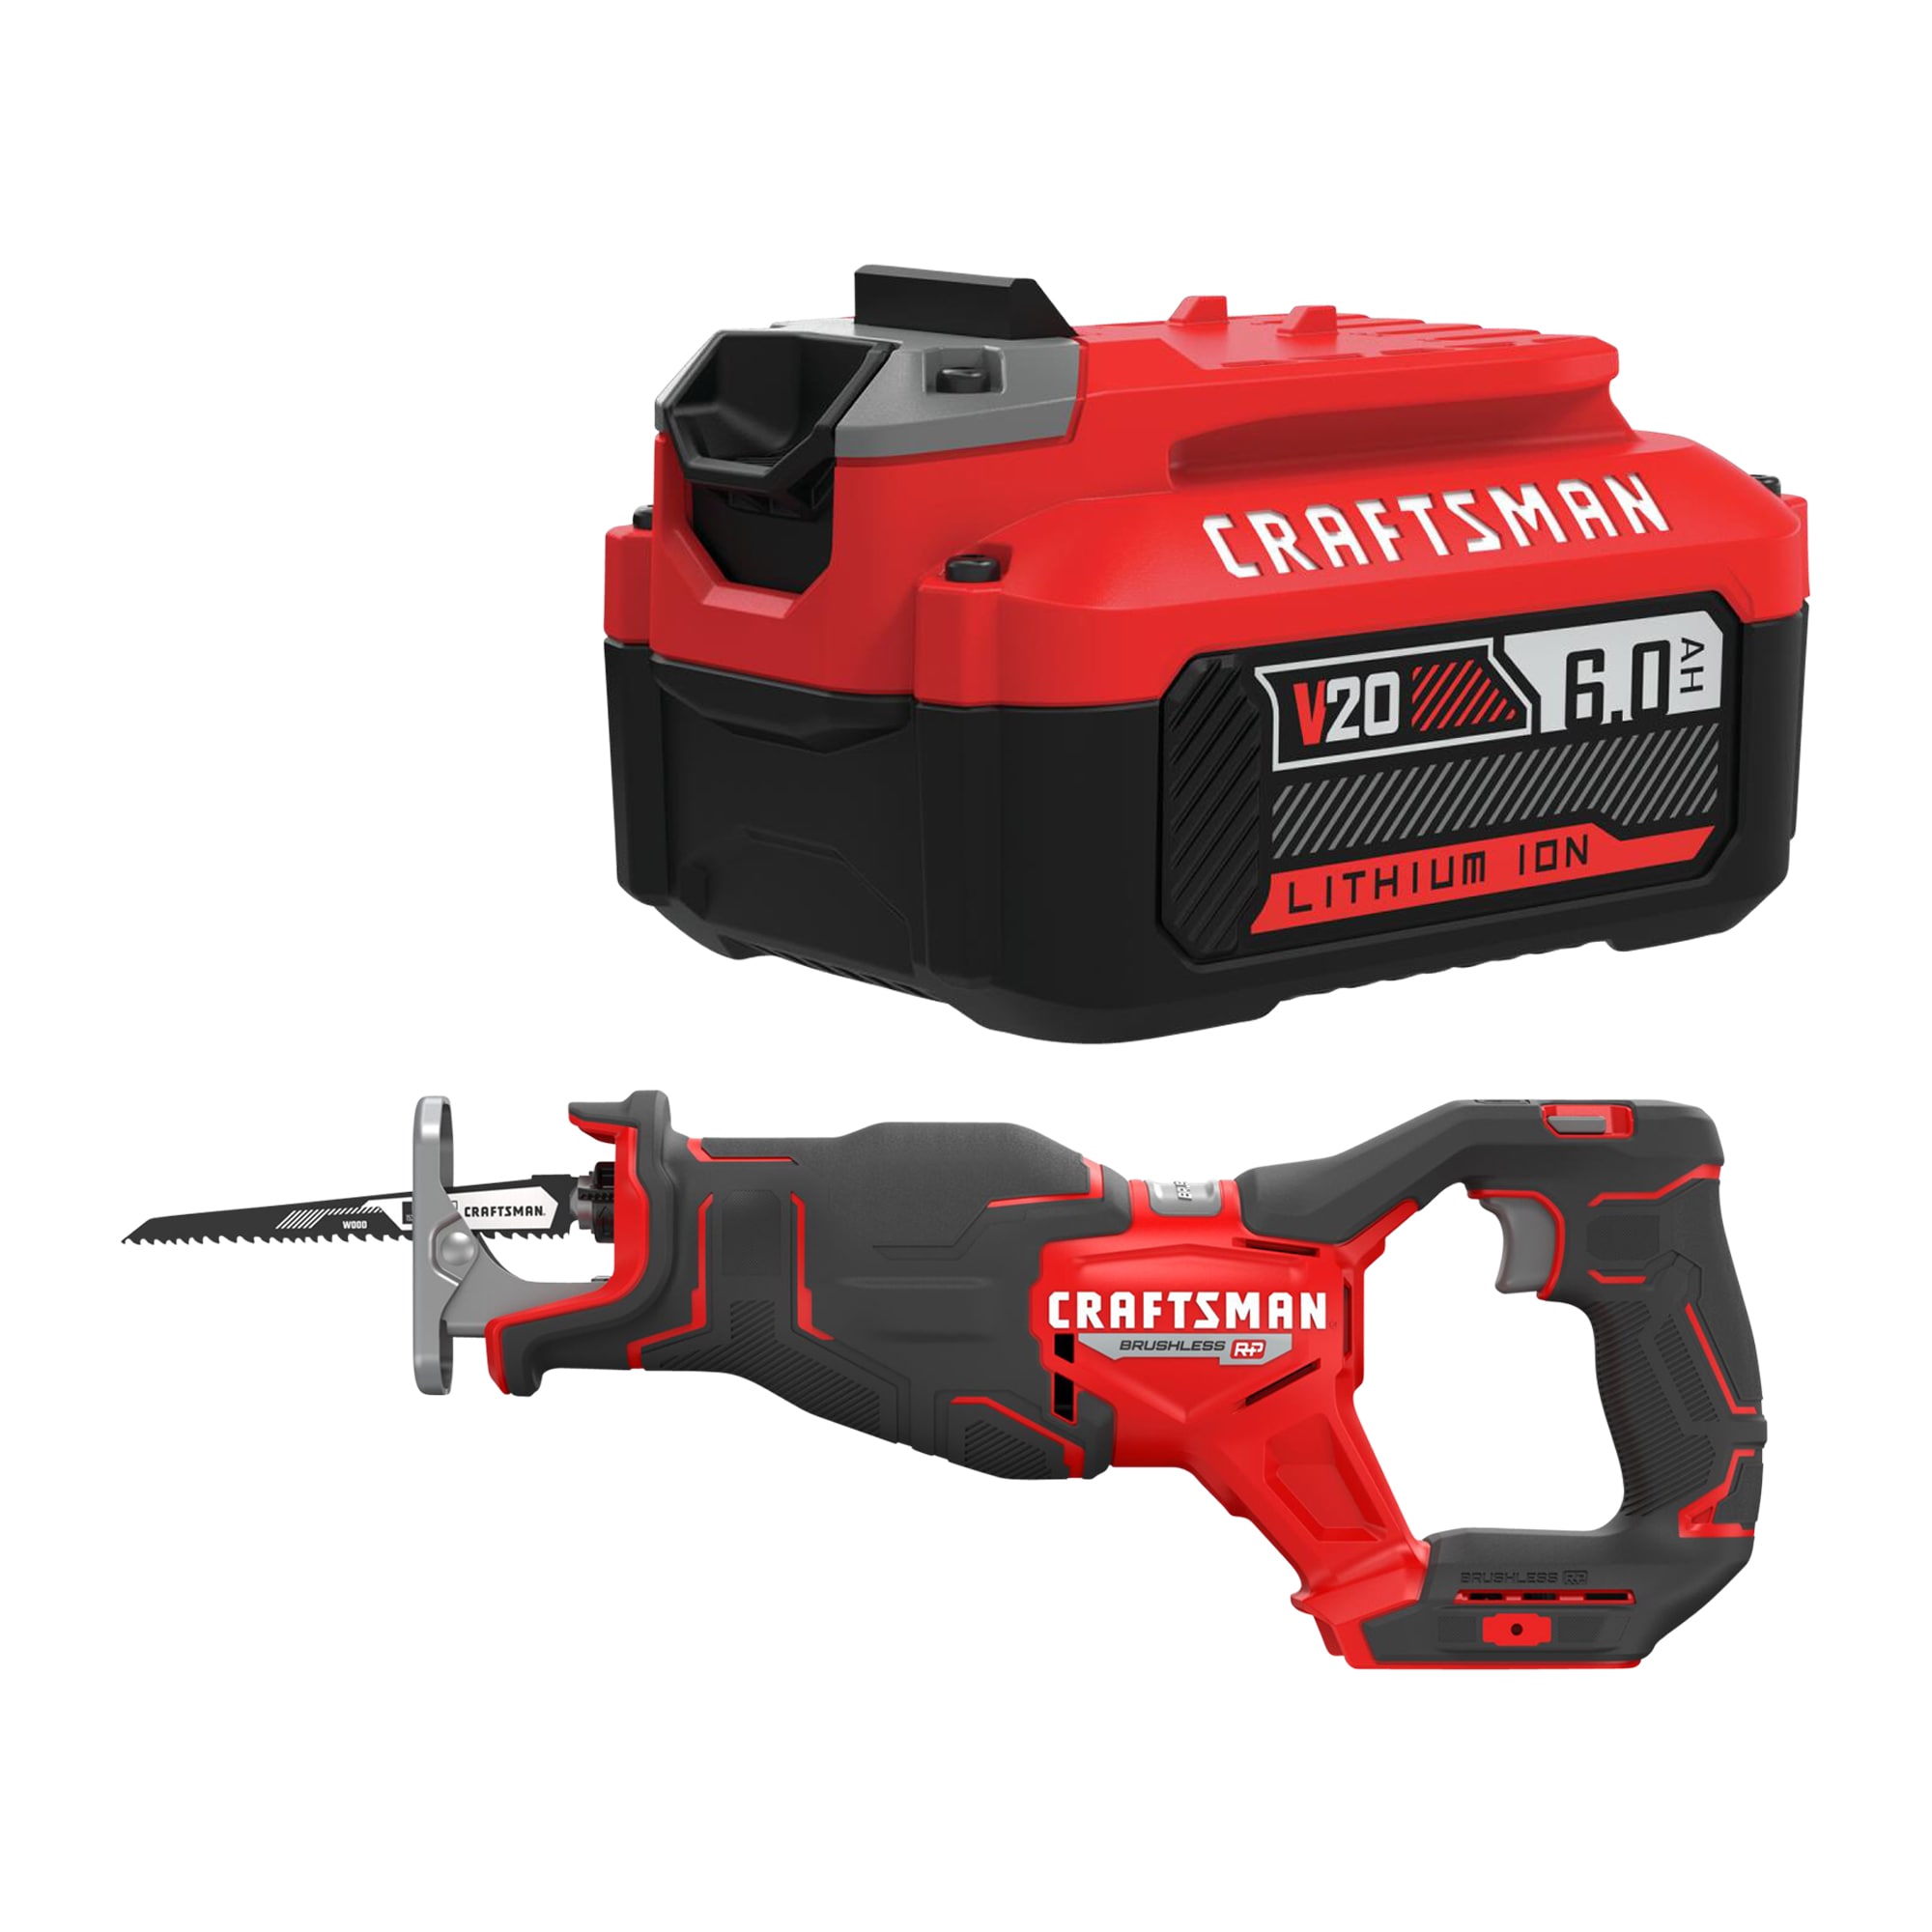 CRAFTSMAN V20 20-volt Max Variable Speed Brushless Cordless Reciprocating Saw & V20 20-Volt Max 6 Amp-Hour Lithium Power Tool Battery